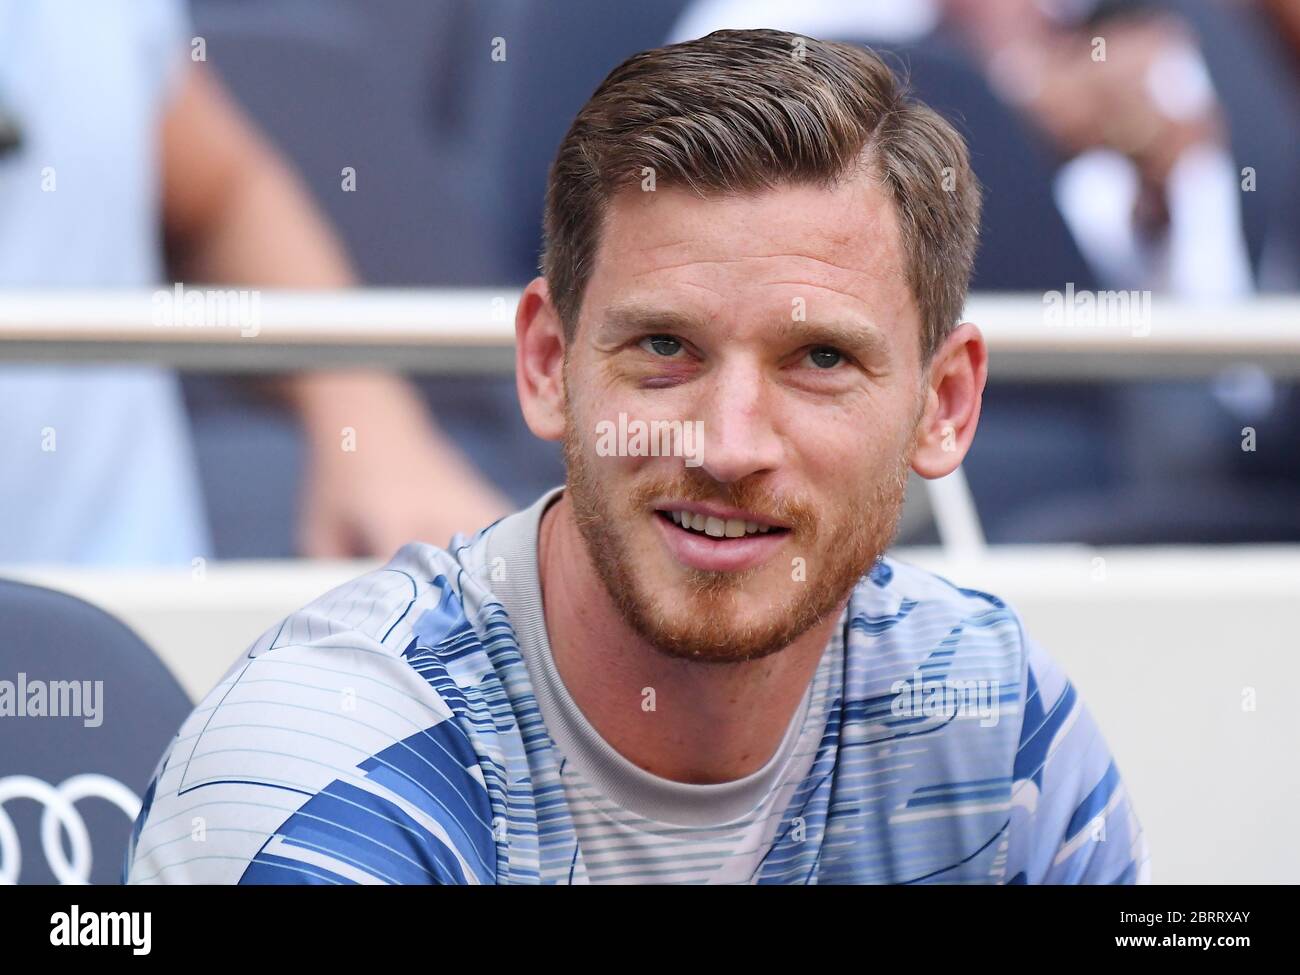 LONDON, ENGLAND - AUGUST 25, 2019: Jan Vertonghen of Tottenham pictured ahead of the 2019/20 Premier League game between Tottenham Hotspur FC and Newcastle United FC at Tottenham Hotspur Stadium. Stock Photo